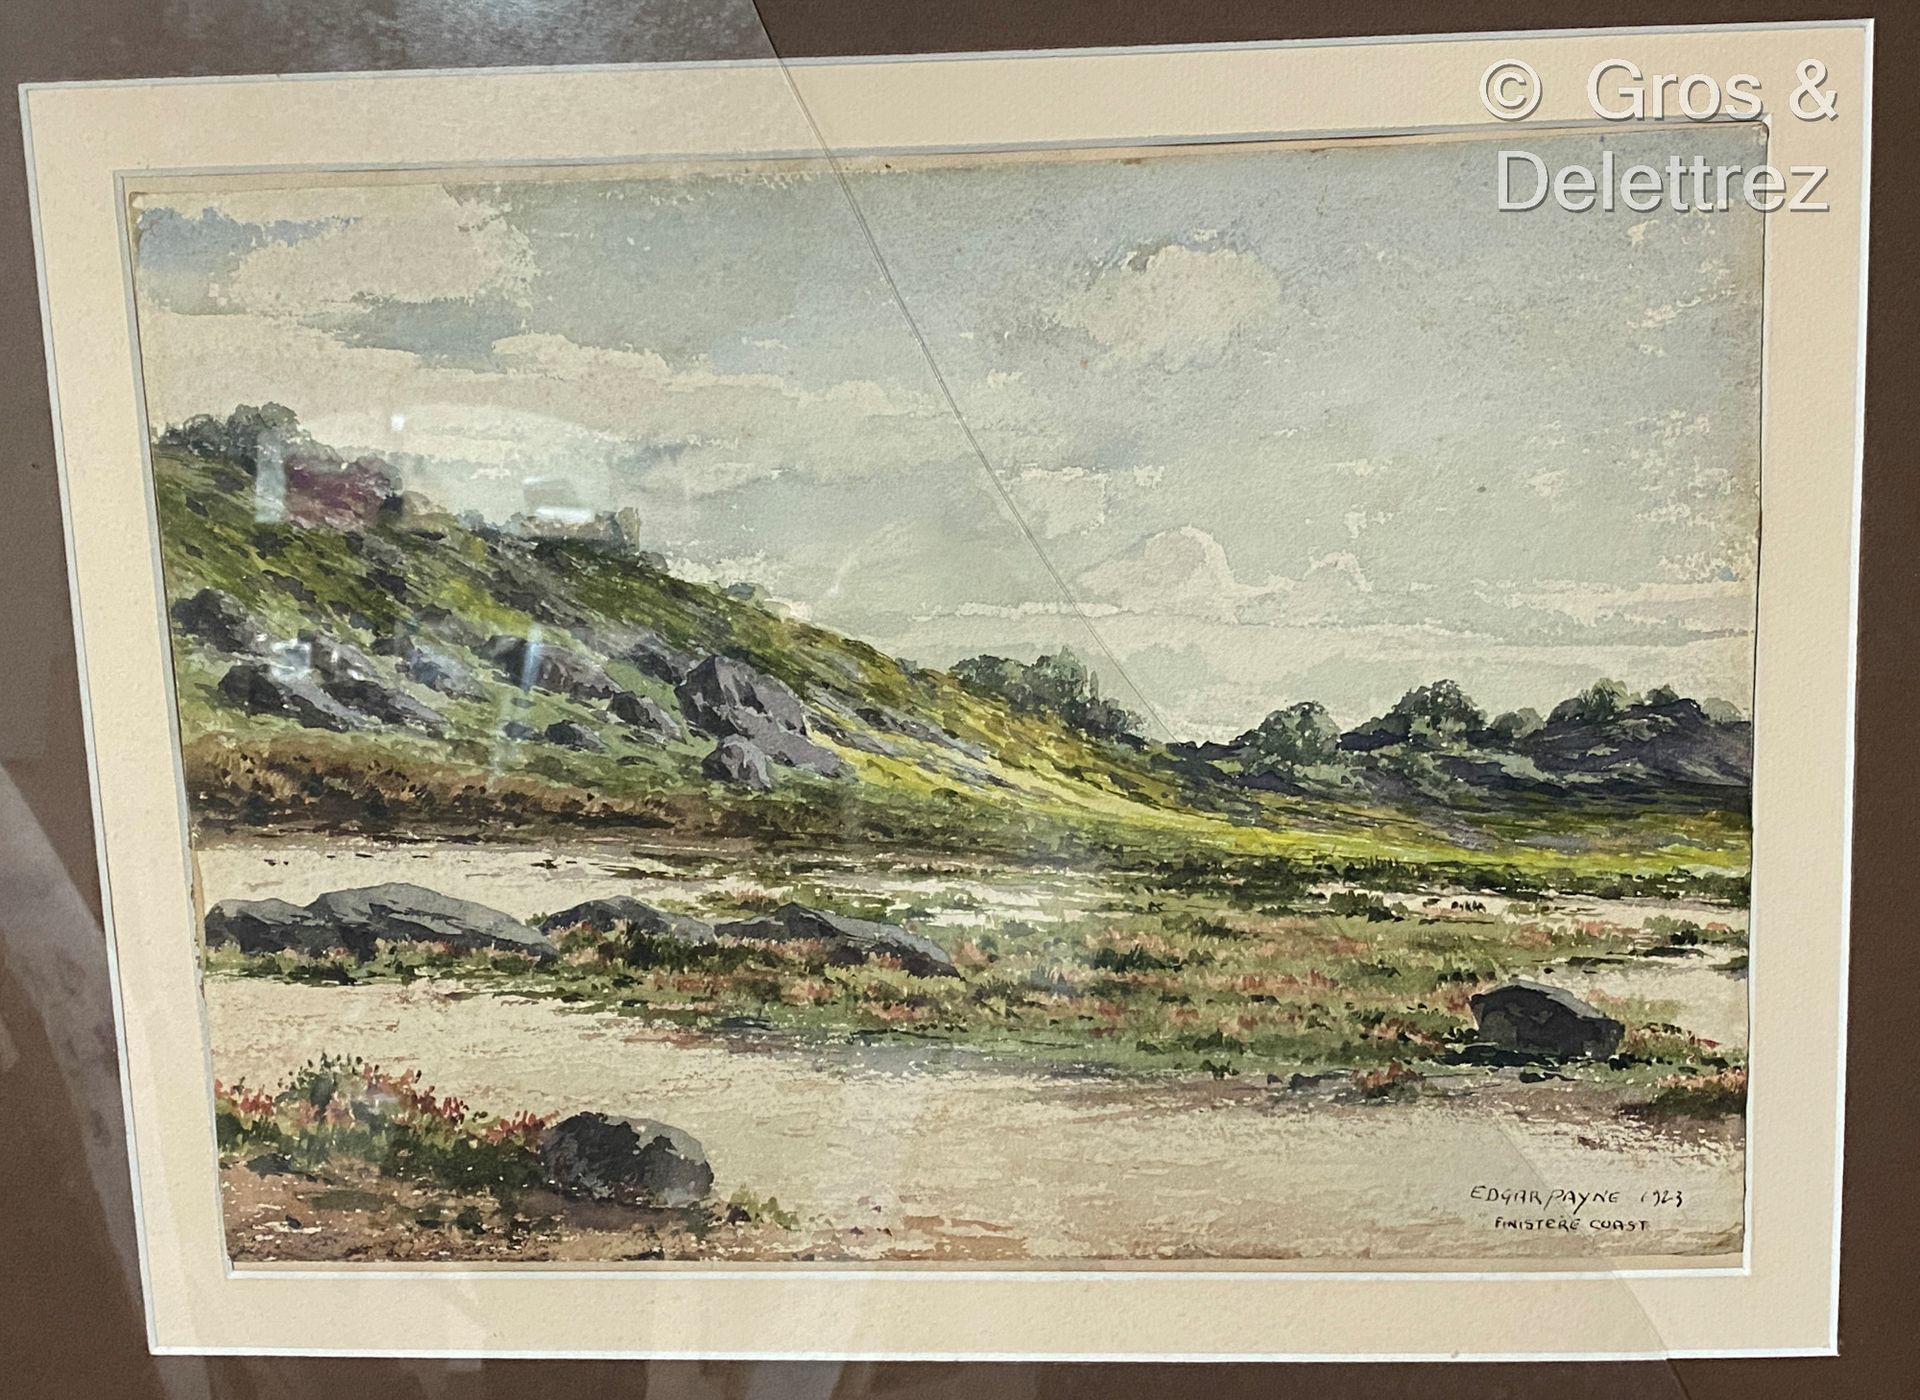 Null (E) PAYNE

View of Finistère

Watercolor signed lower right

Broken window